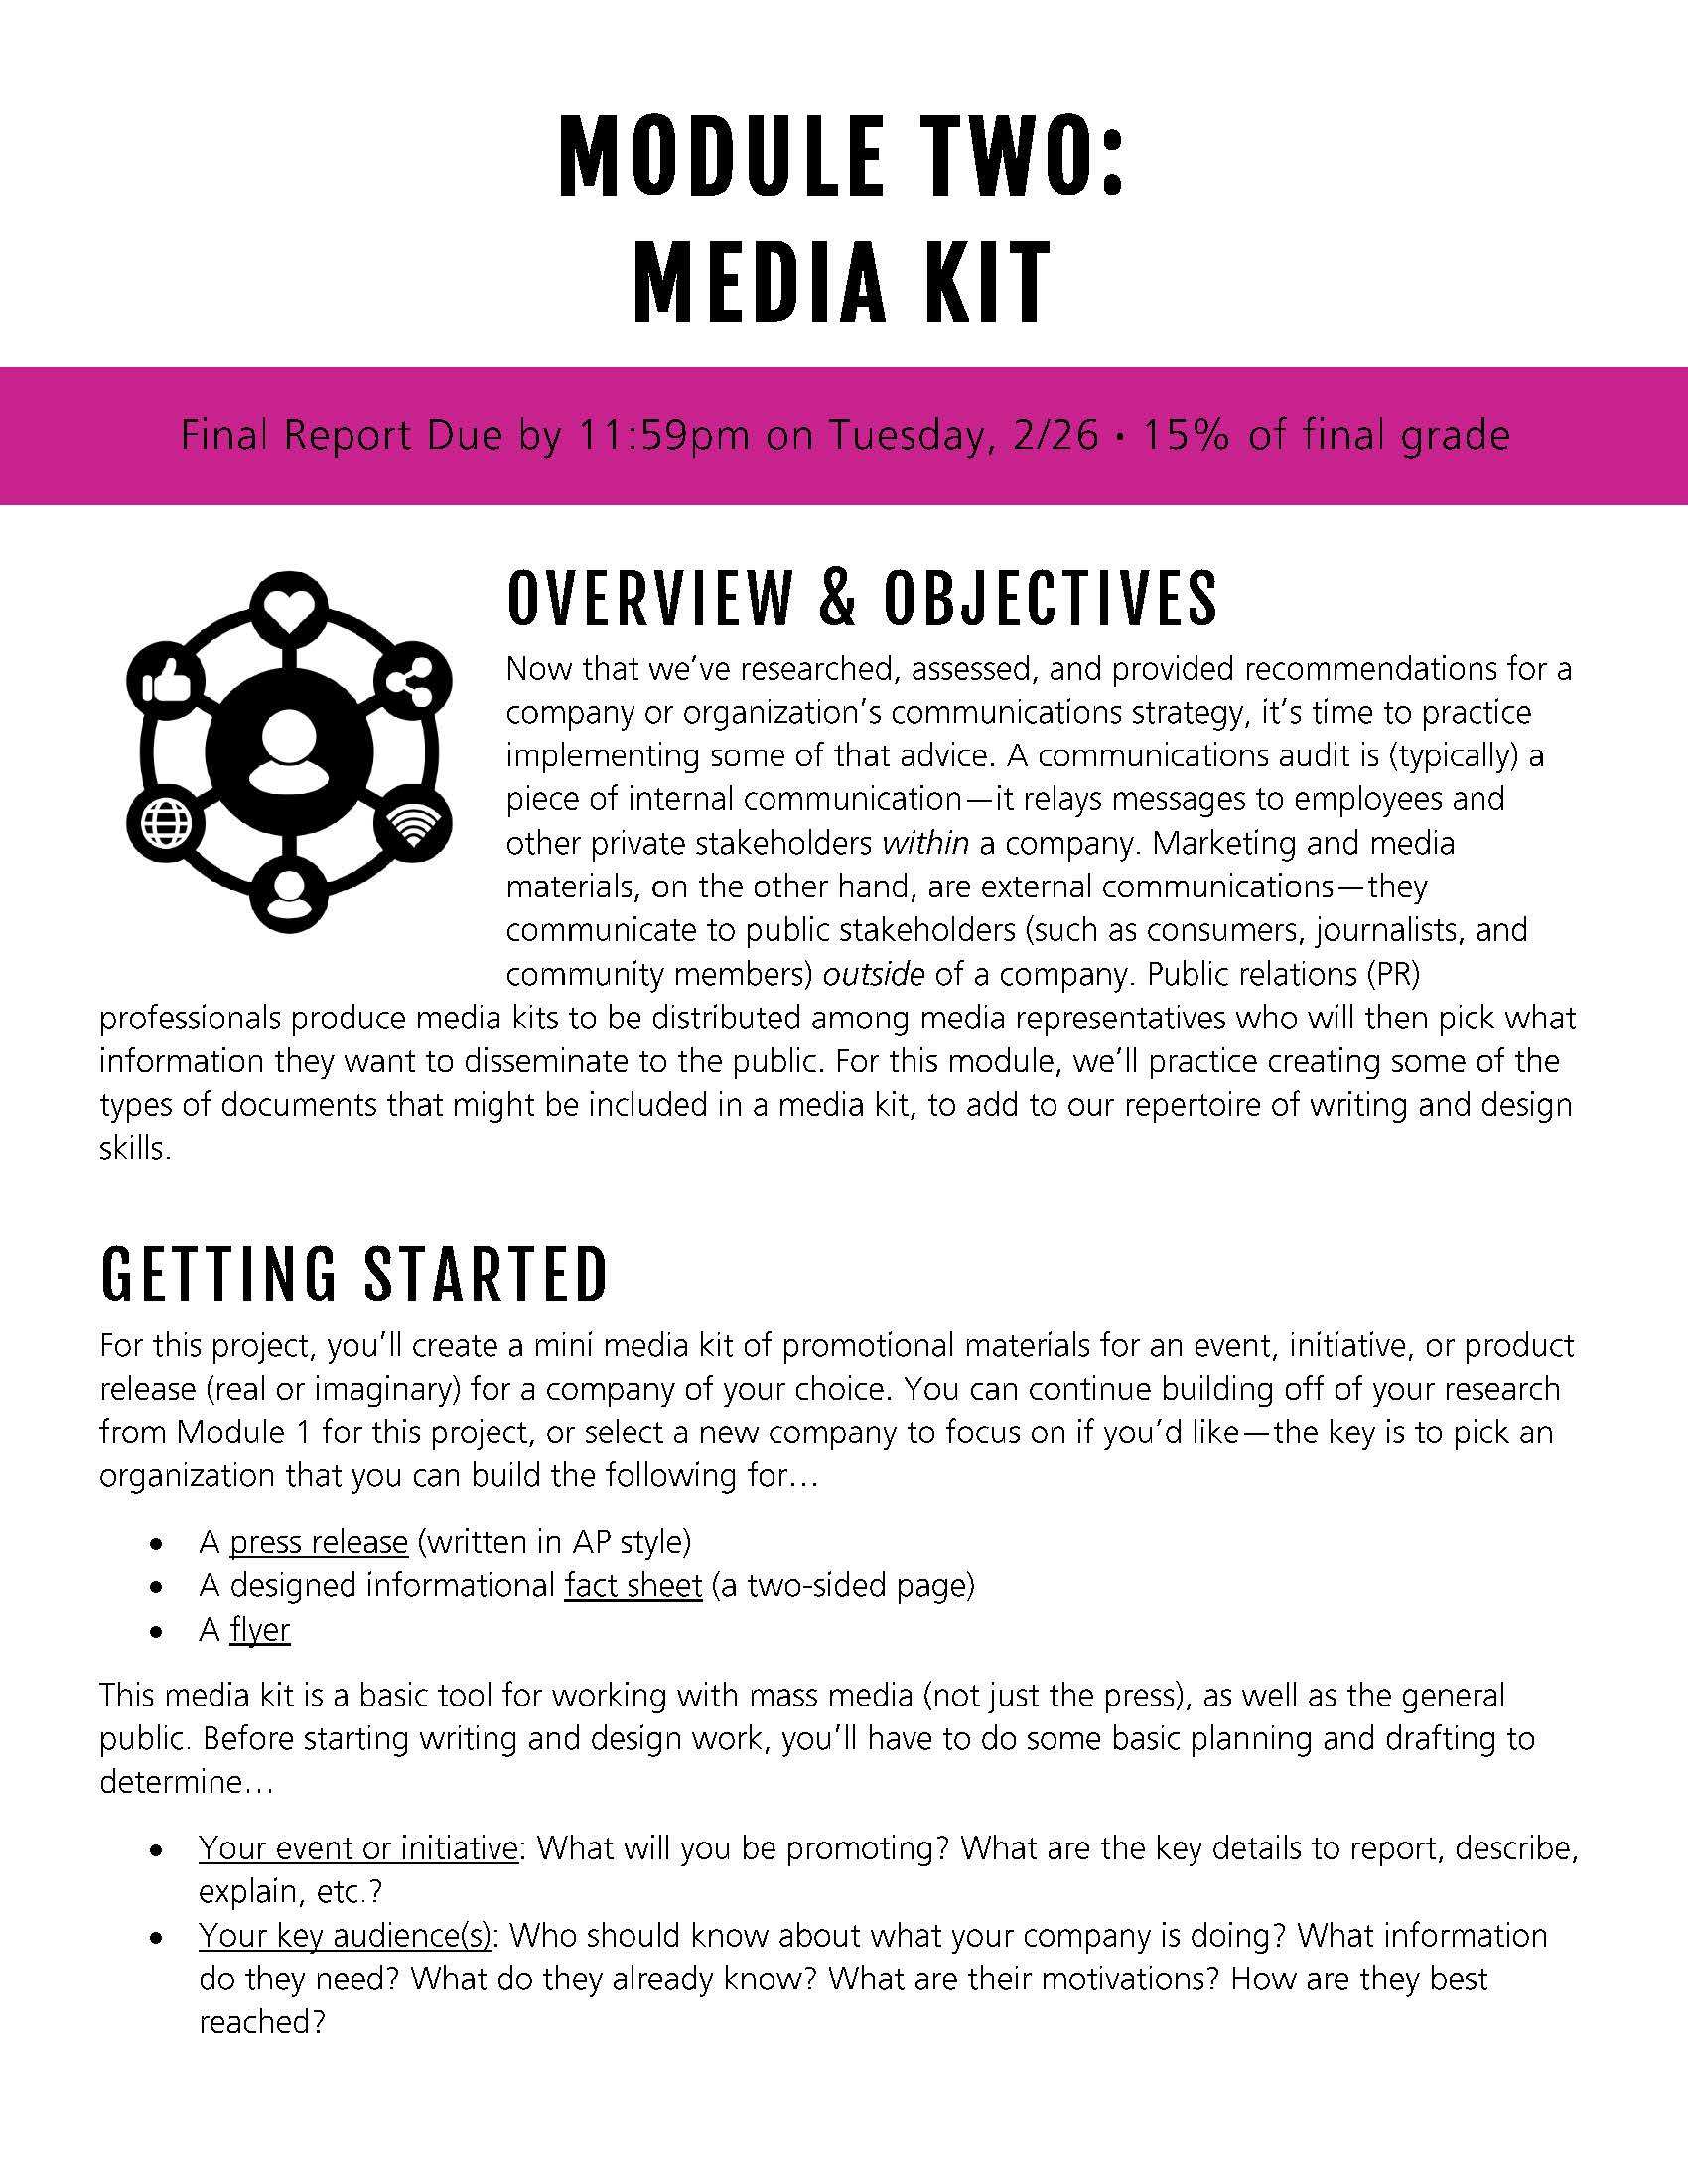 The first page of the "Media Kit" module from ENGL 306, Introduction to Professional Writing